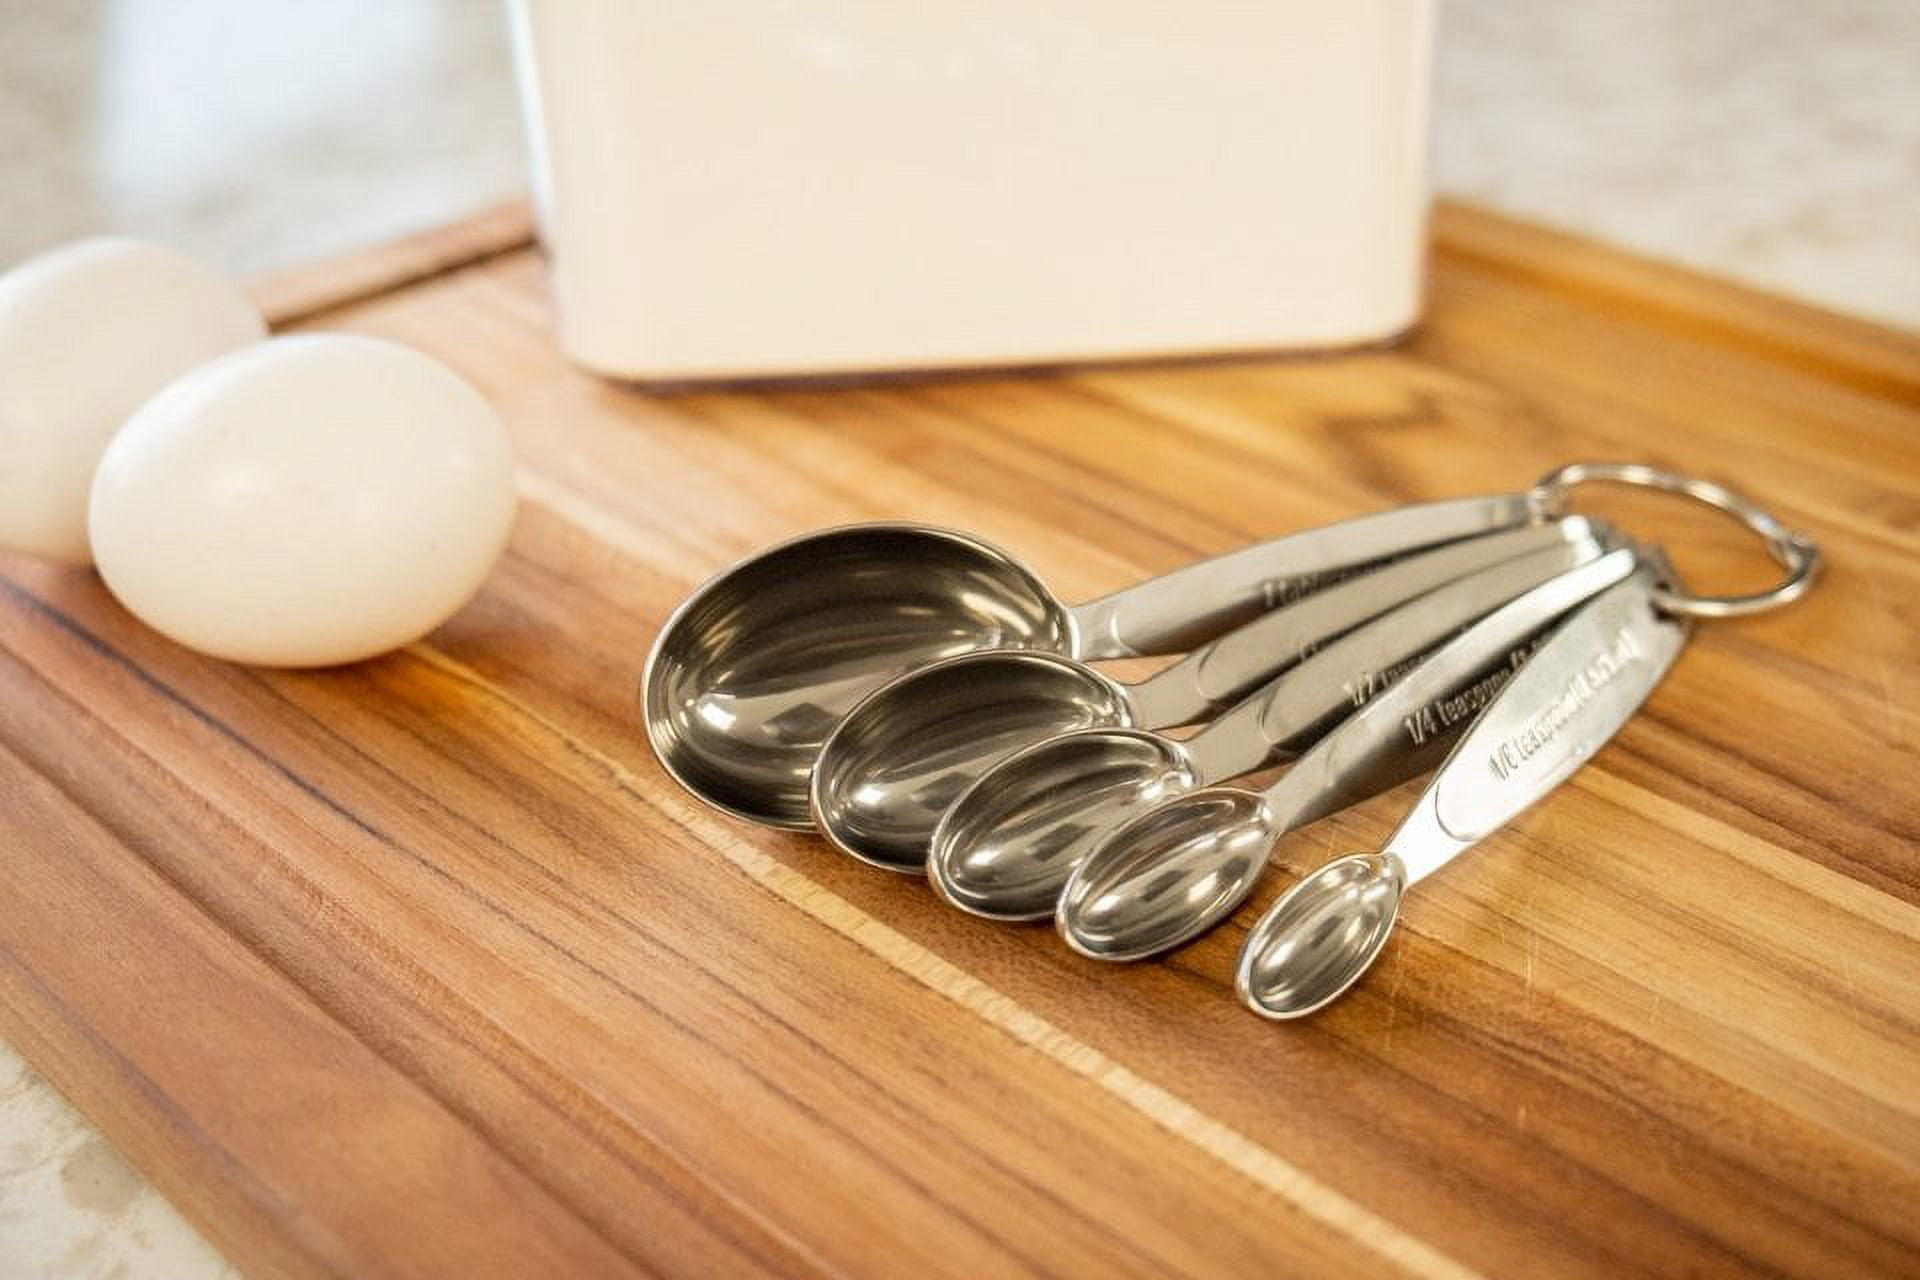 Measuring Spoons Odd-Sizes Stainless Steel 5-Piece Set, Cuisipro